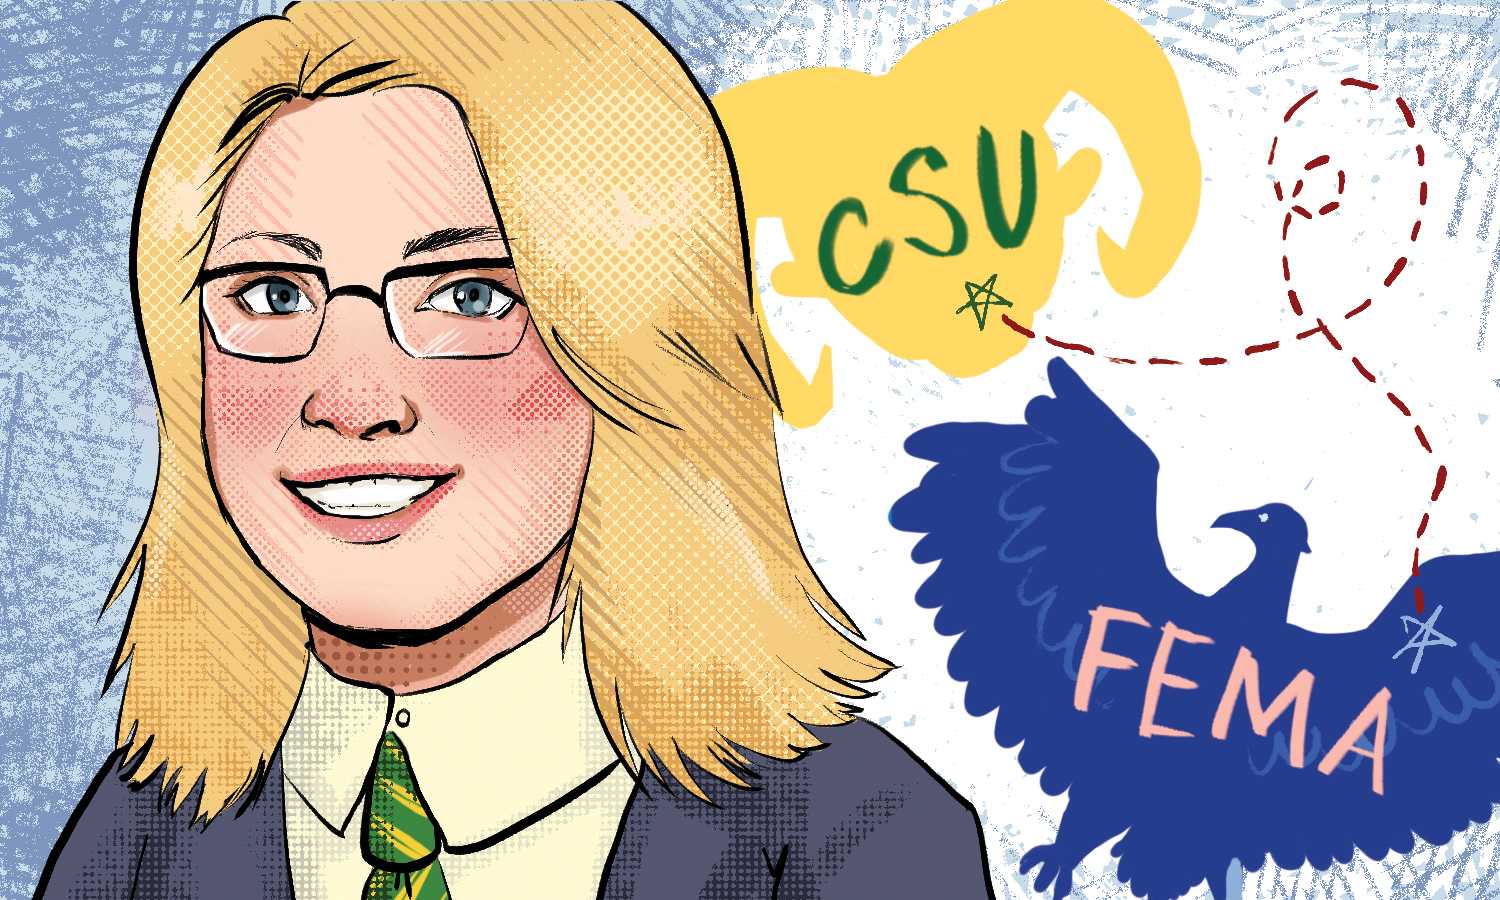 Graphic illustration depicting a female portrait of Deanne Criswell (a CSU alum)